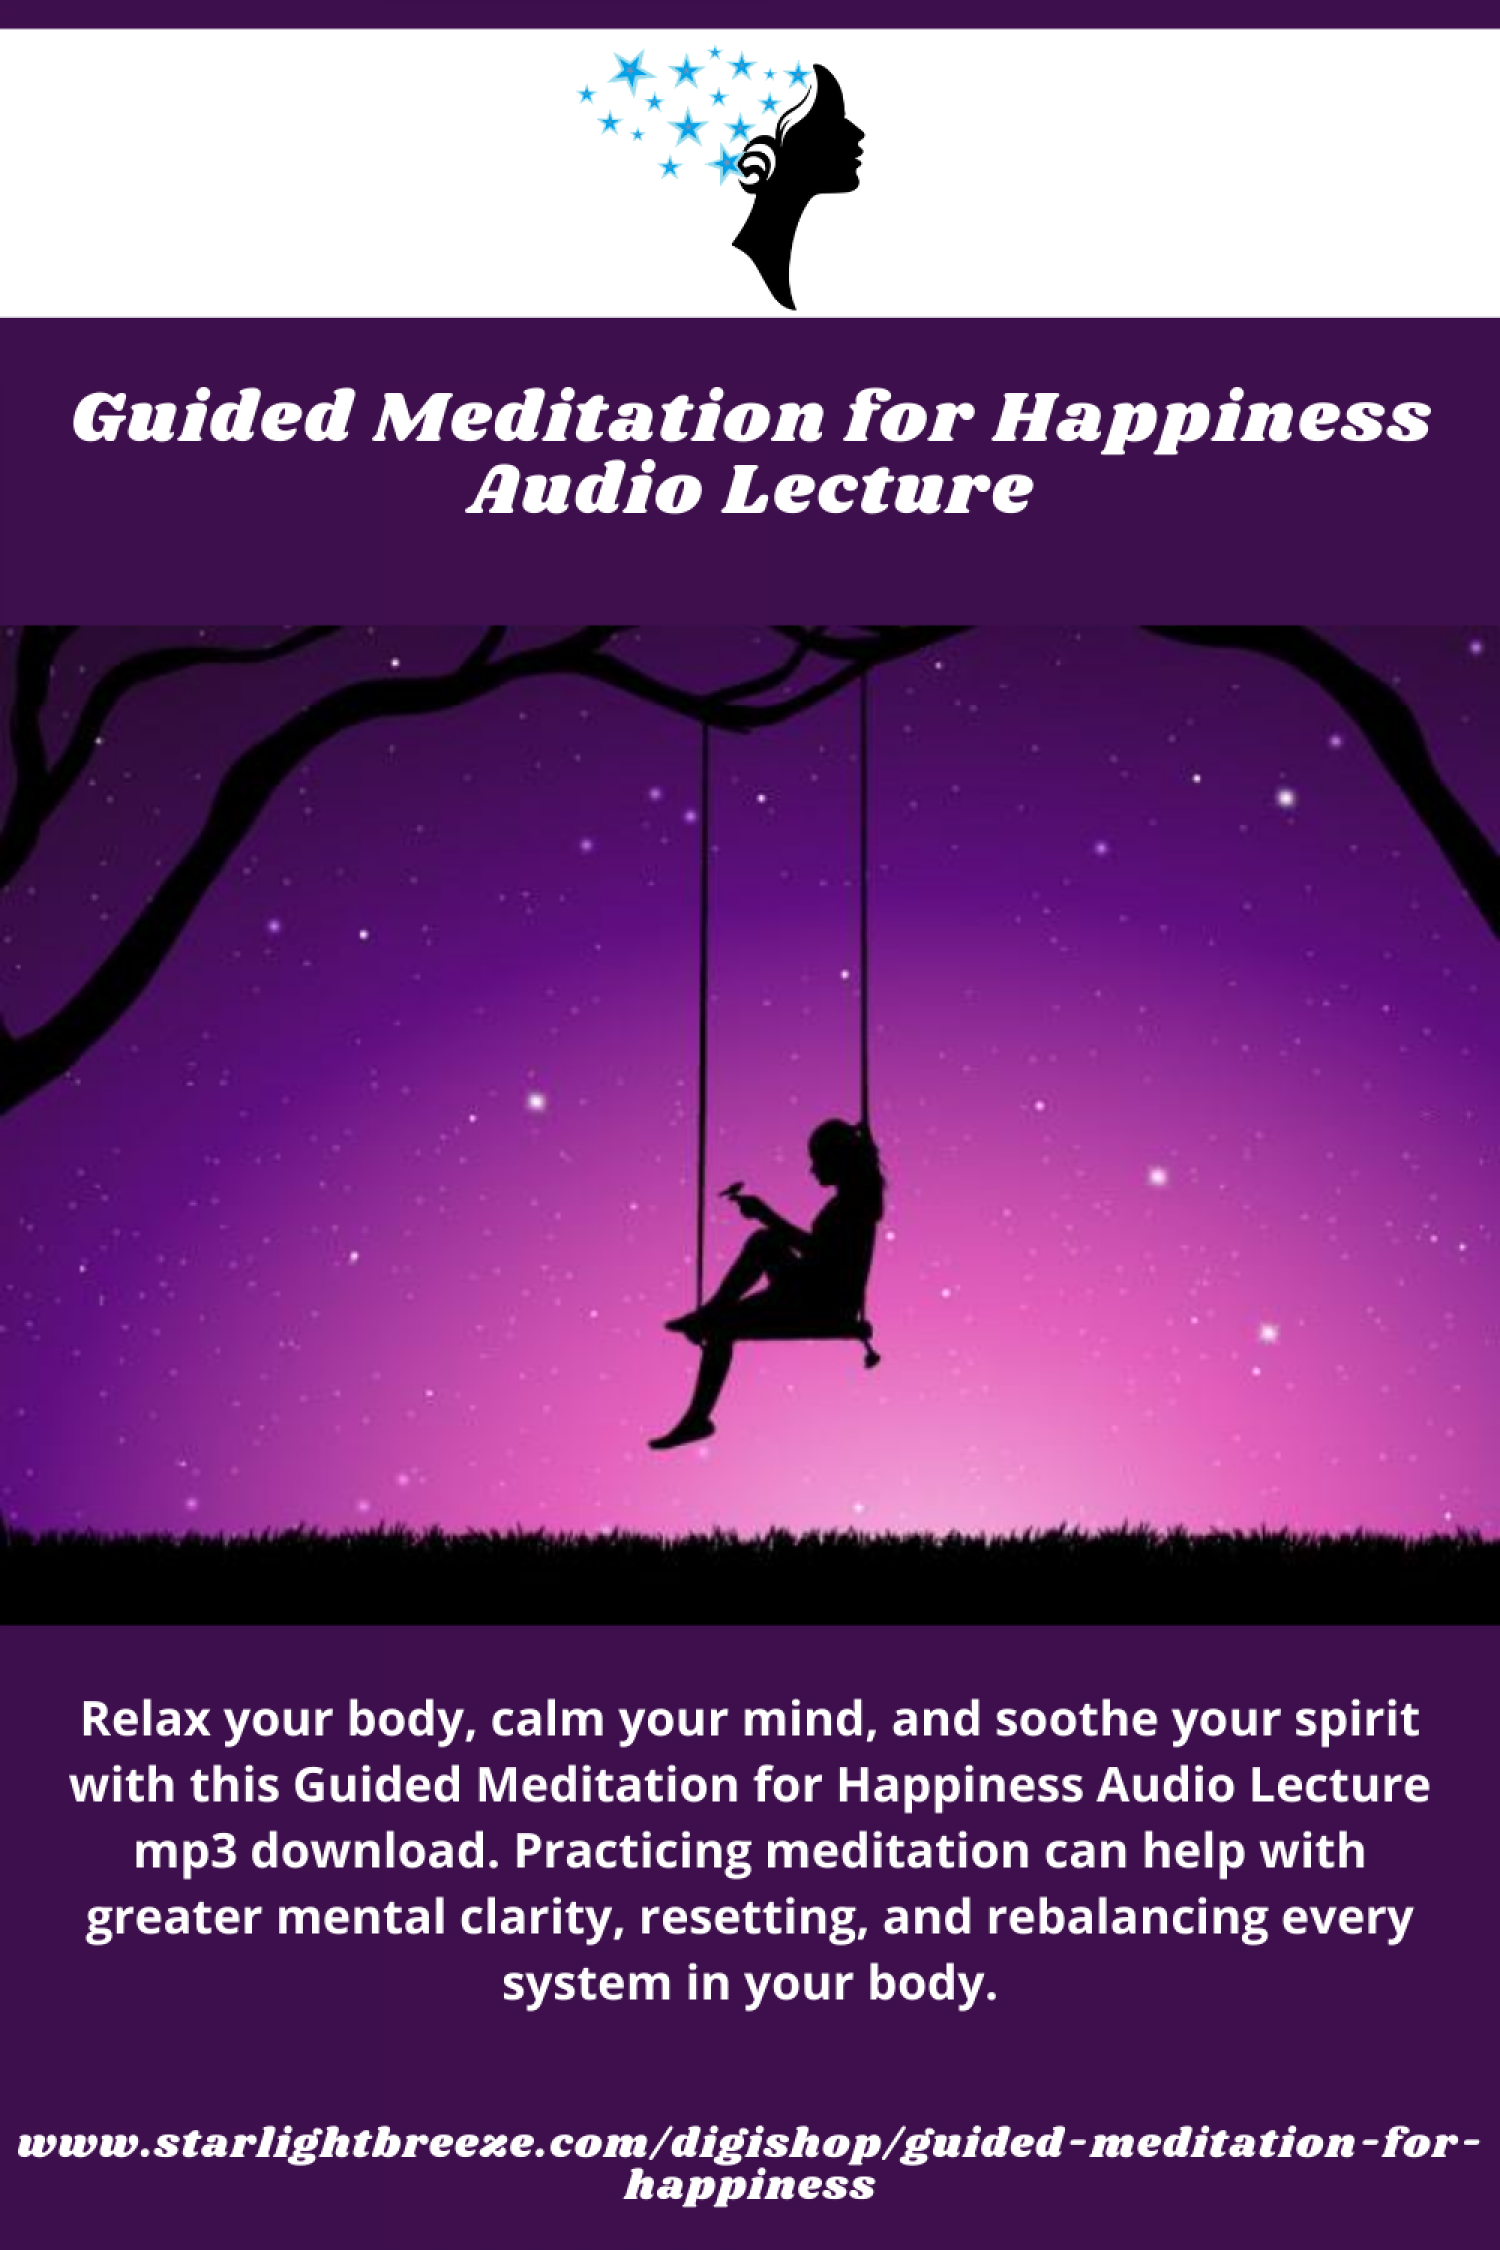 Guided Meditation for Happiness Audio Lecture Infographic